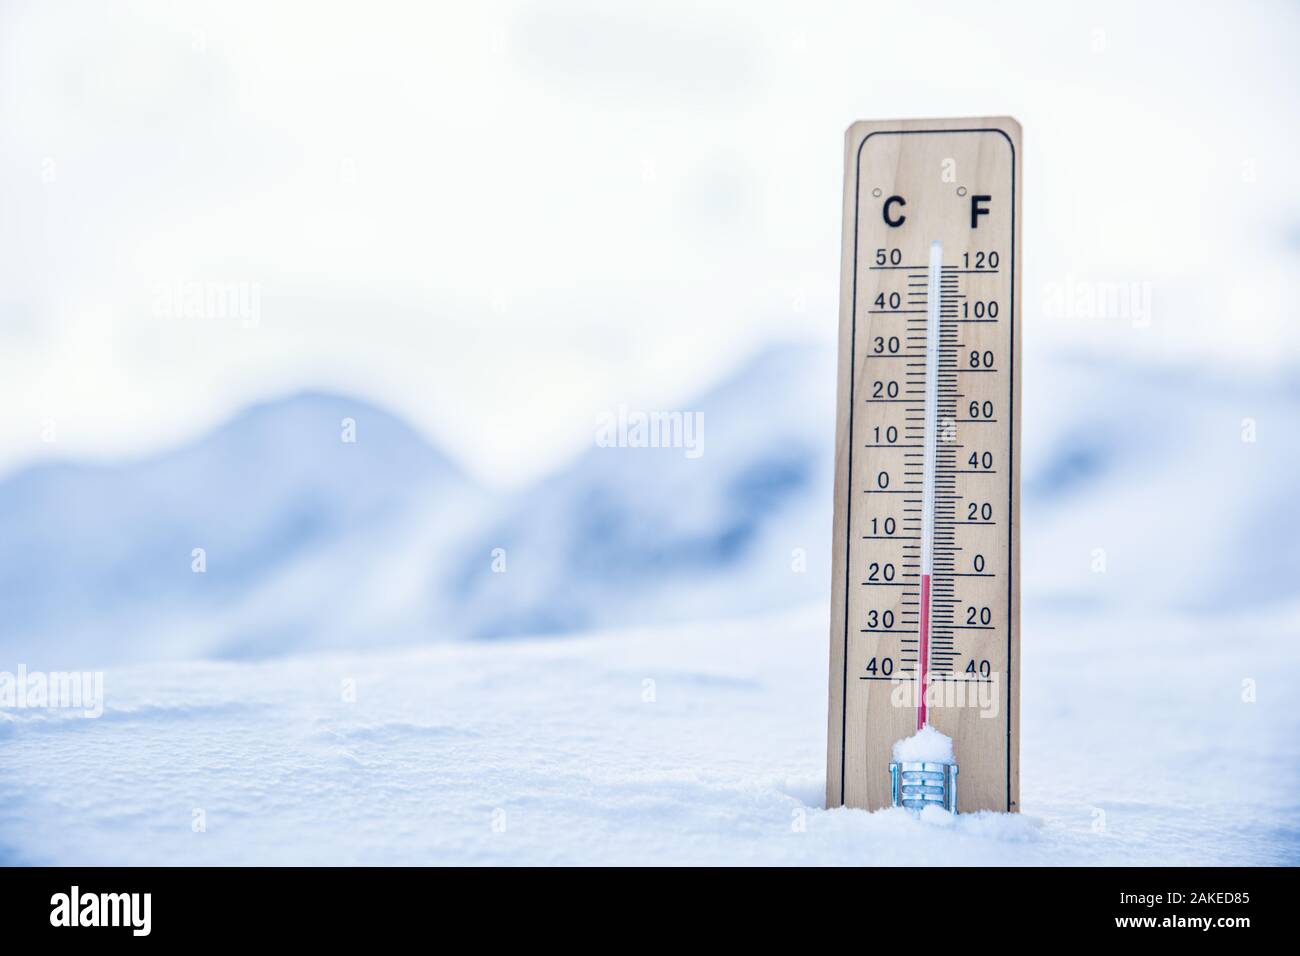 https://c8.alamy.com/comp/2AKED85/thermometer-on-the-mountains-in-the-snow-shows-temperatures-below-zero-low-temperatures-in-degrees-celsius-and-fahrenheit-2AKED85.jpg